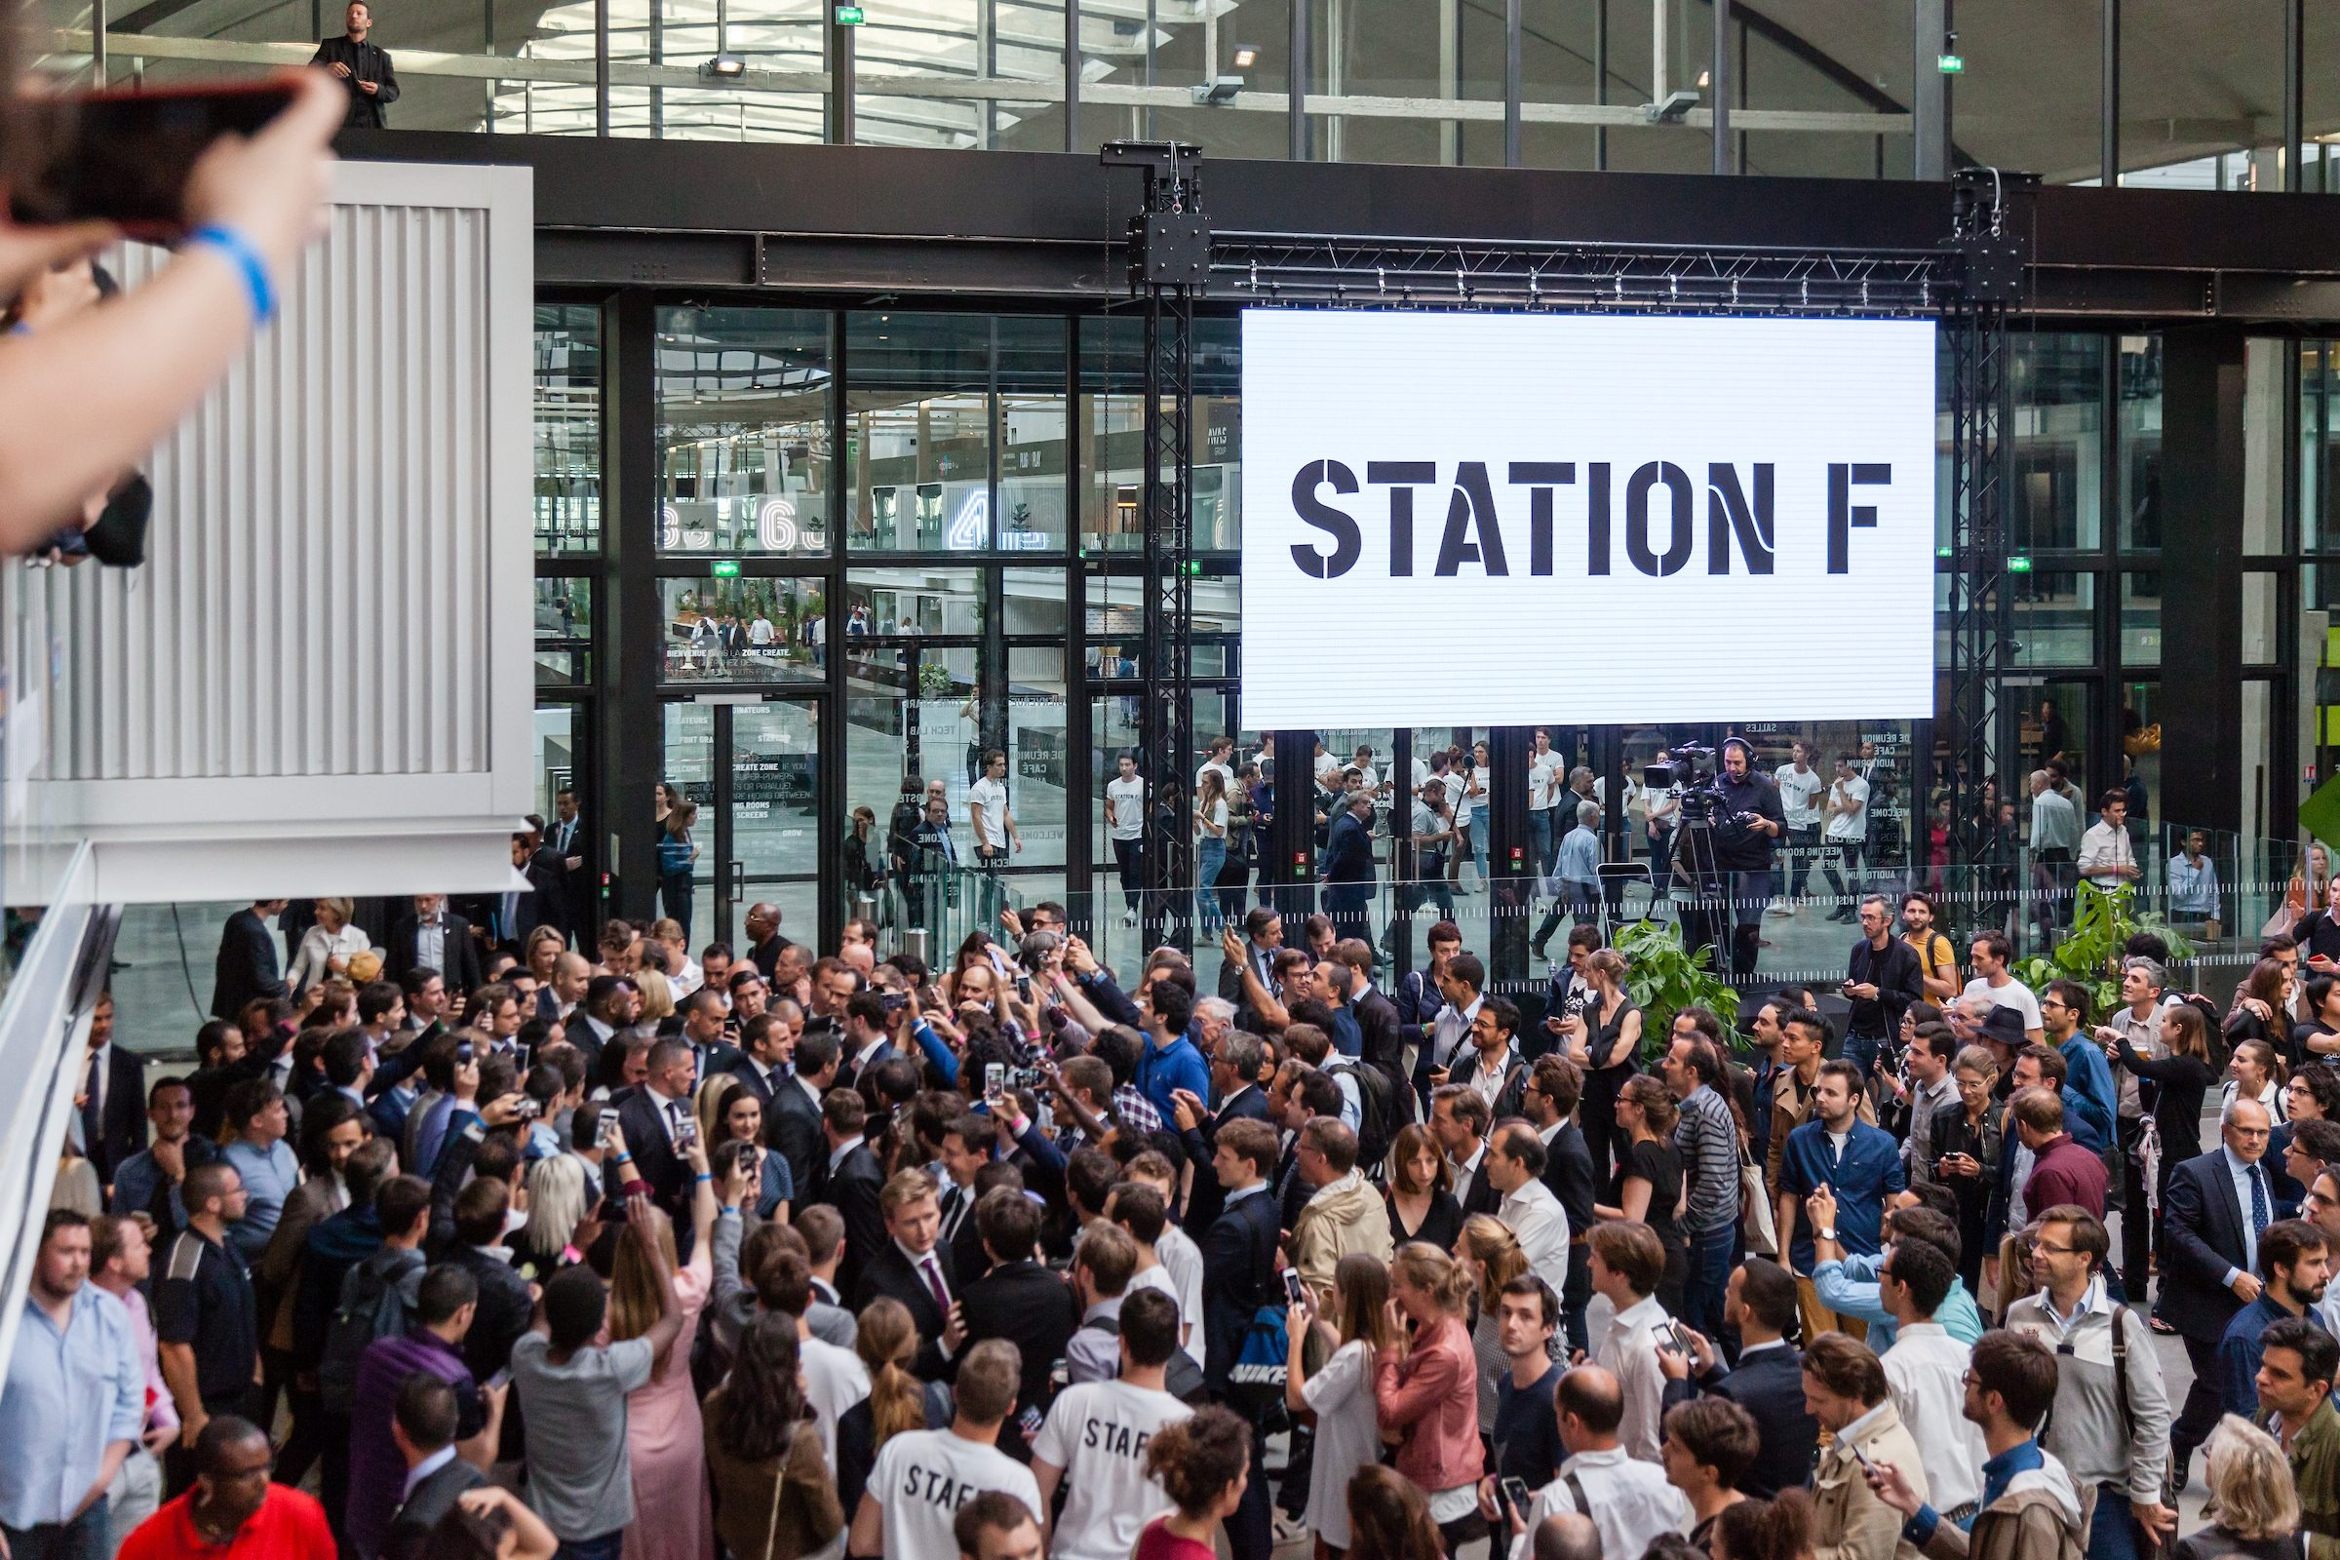 The logo of the startup house during its inauguration at station F